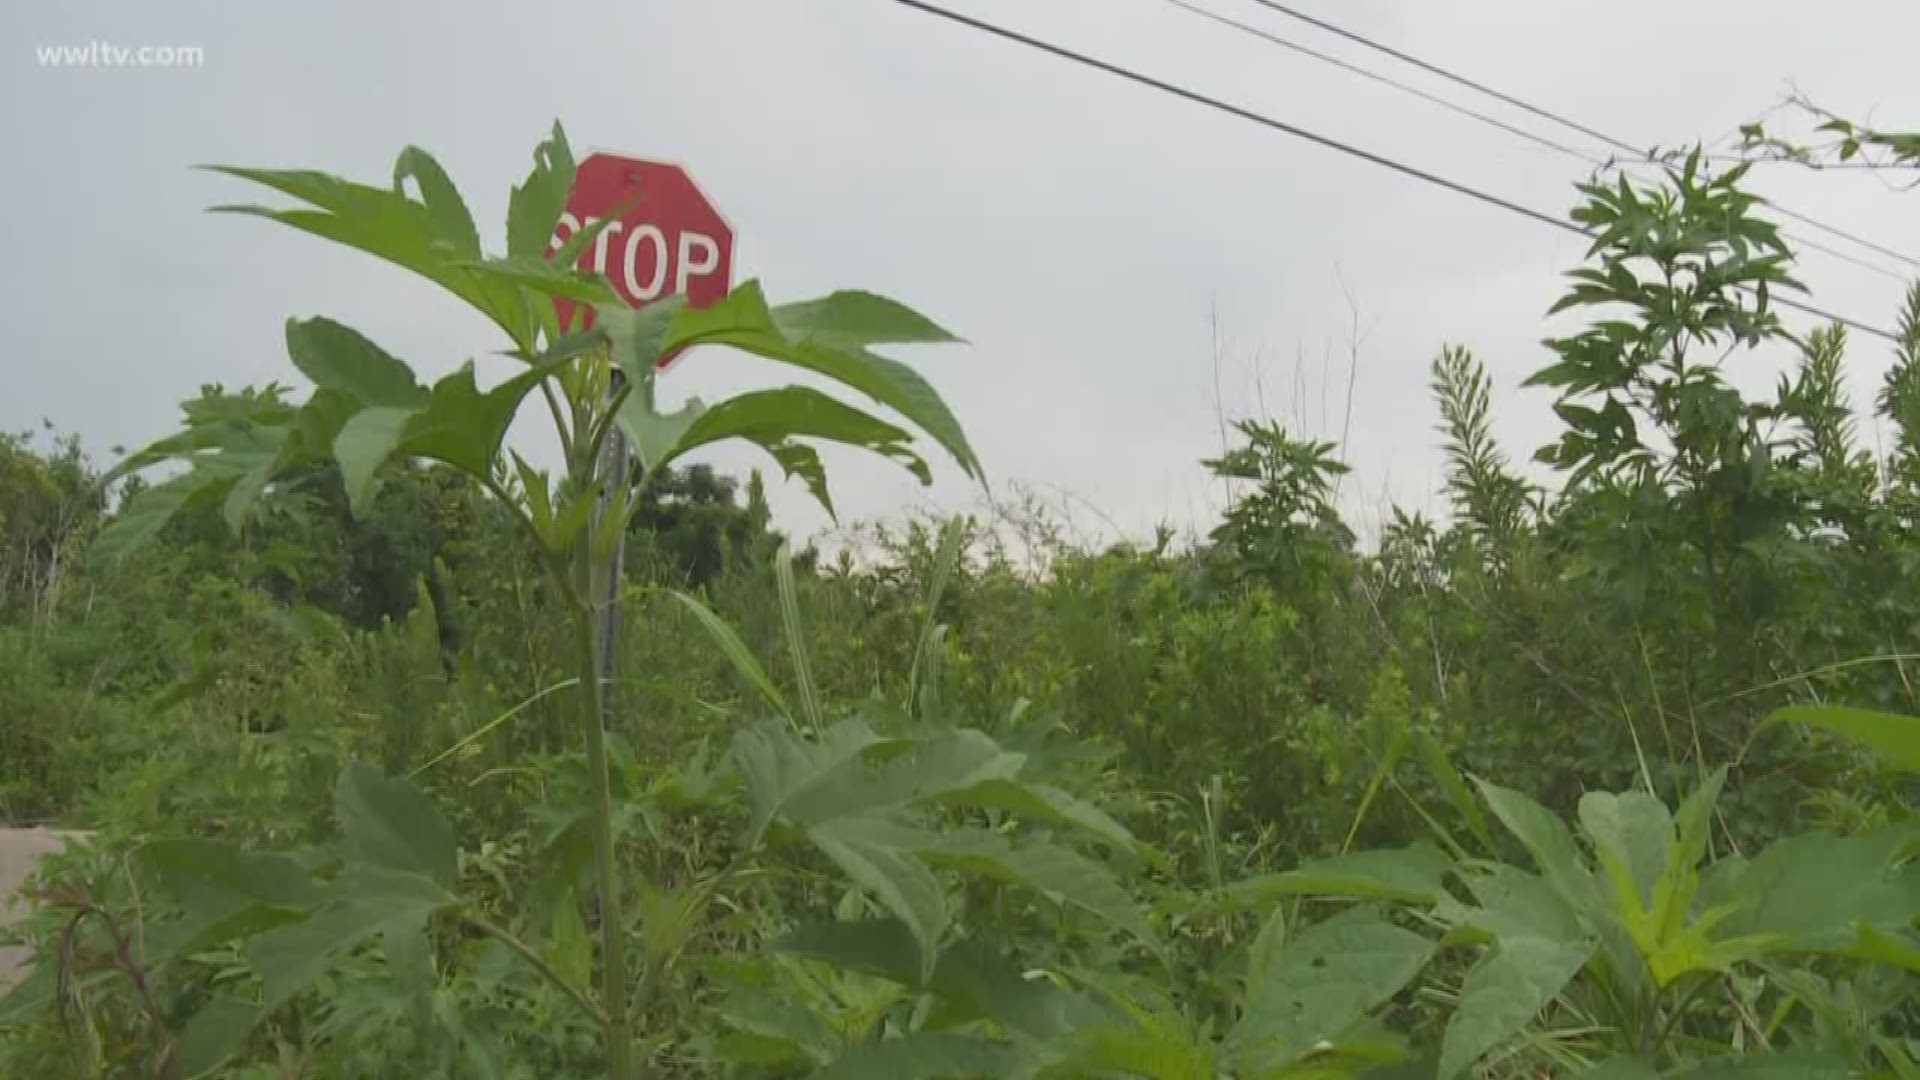 Residents say the overgrown lots not only make it difficult to see, but it is dangerous. 